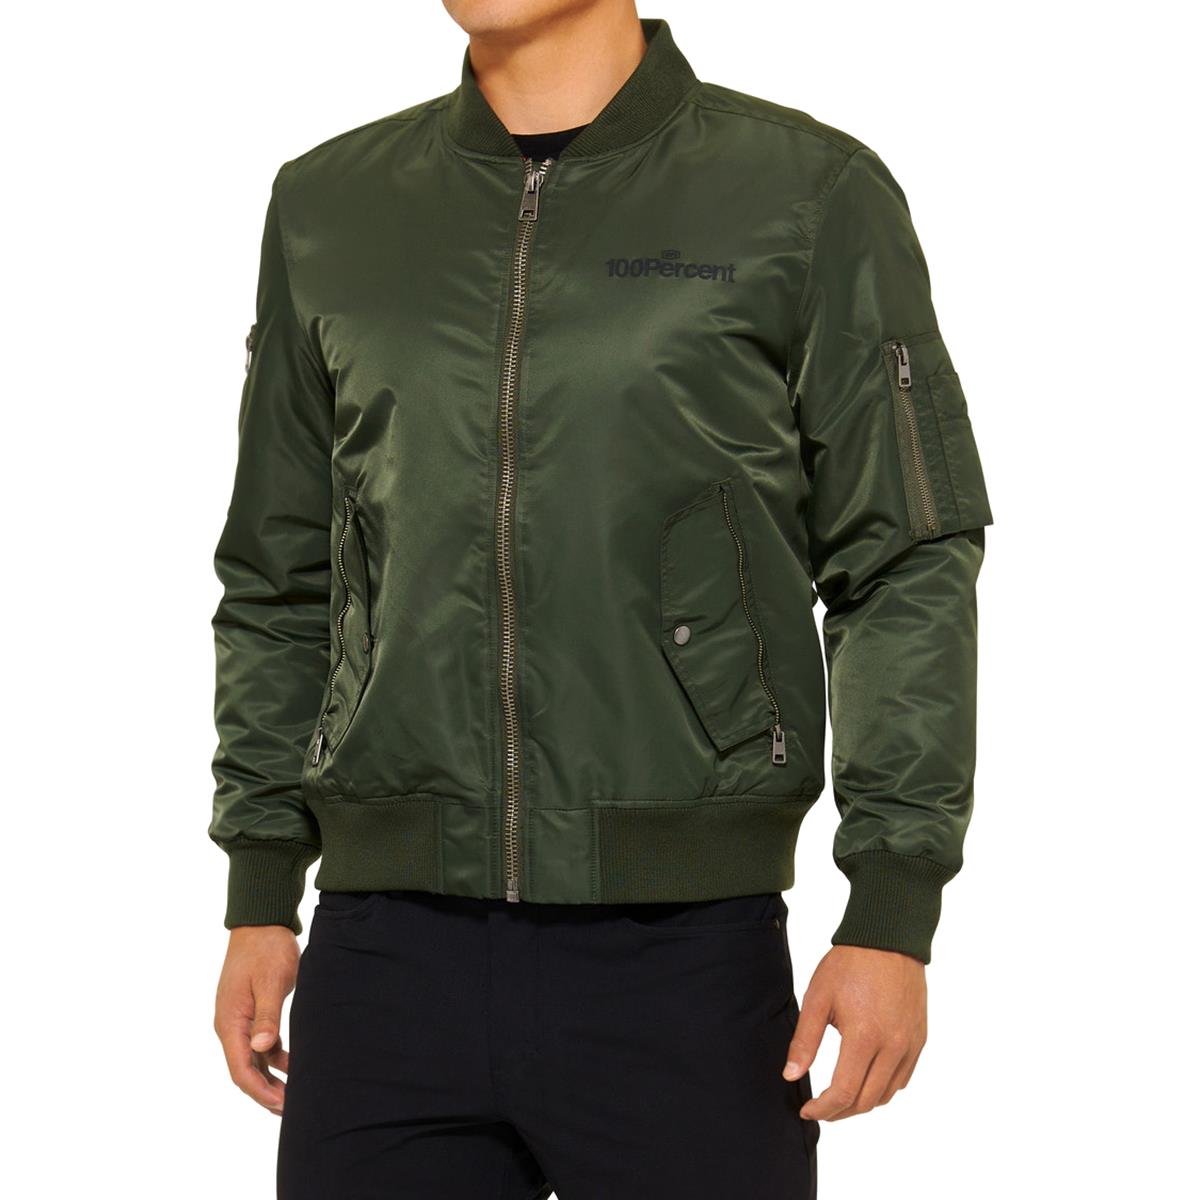 100% Giacca Bomber Zip Army Verde